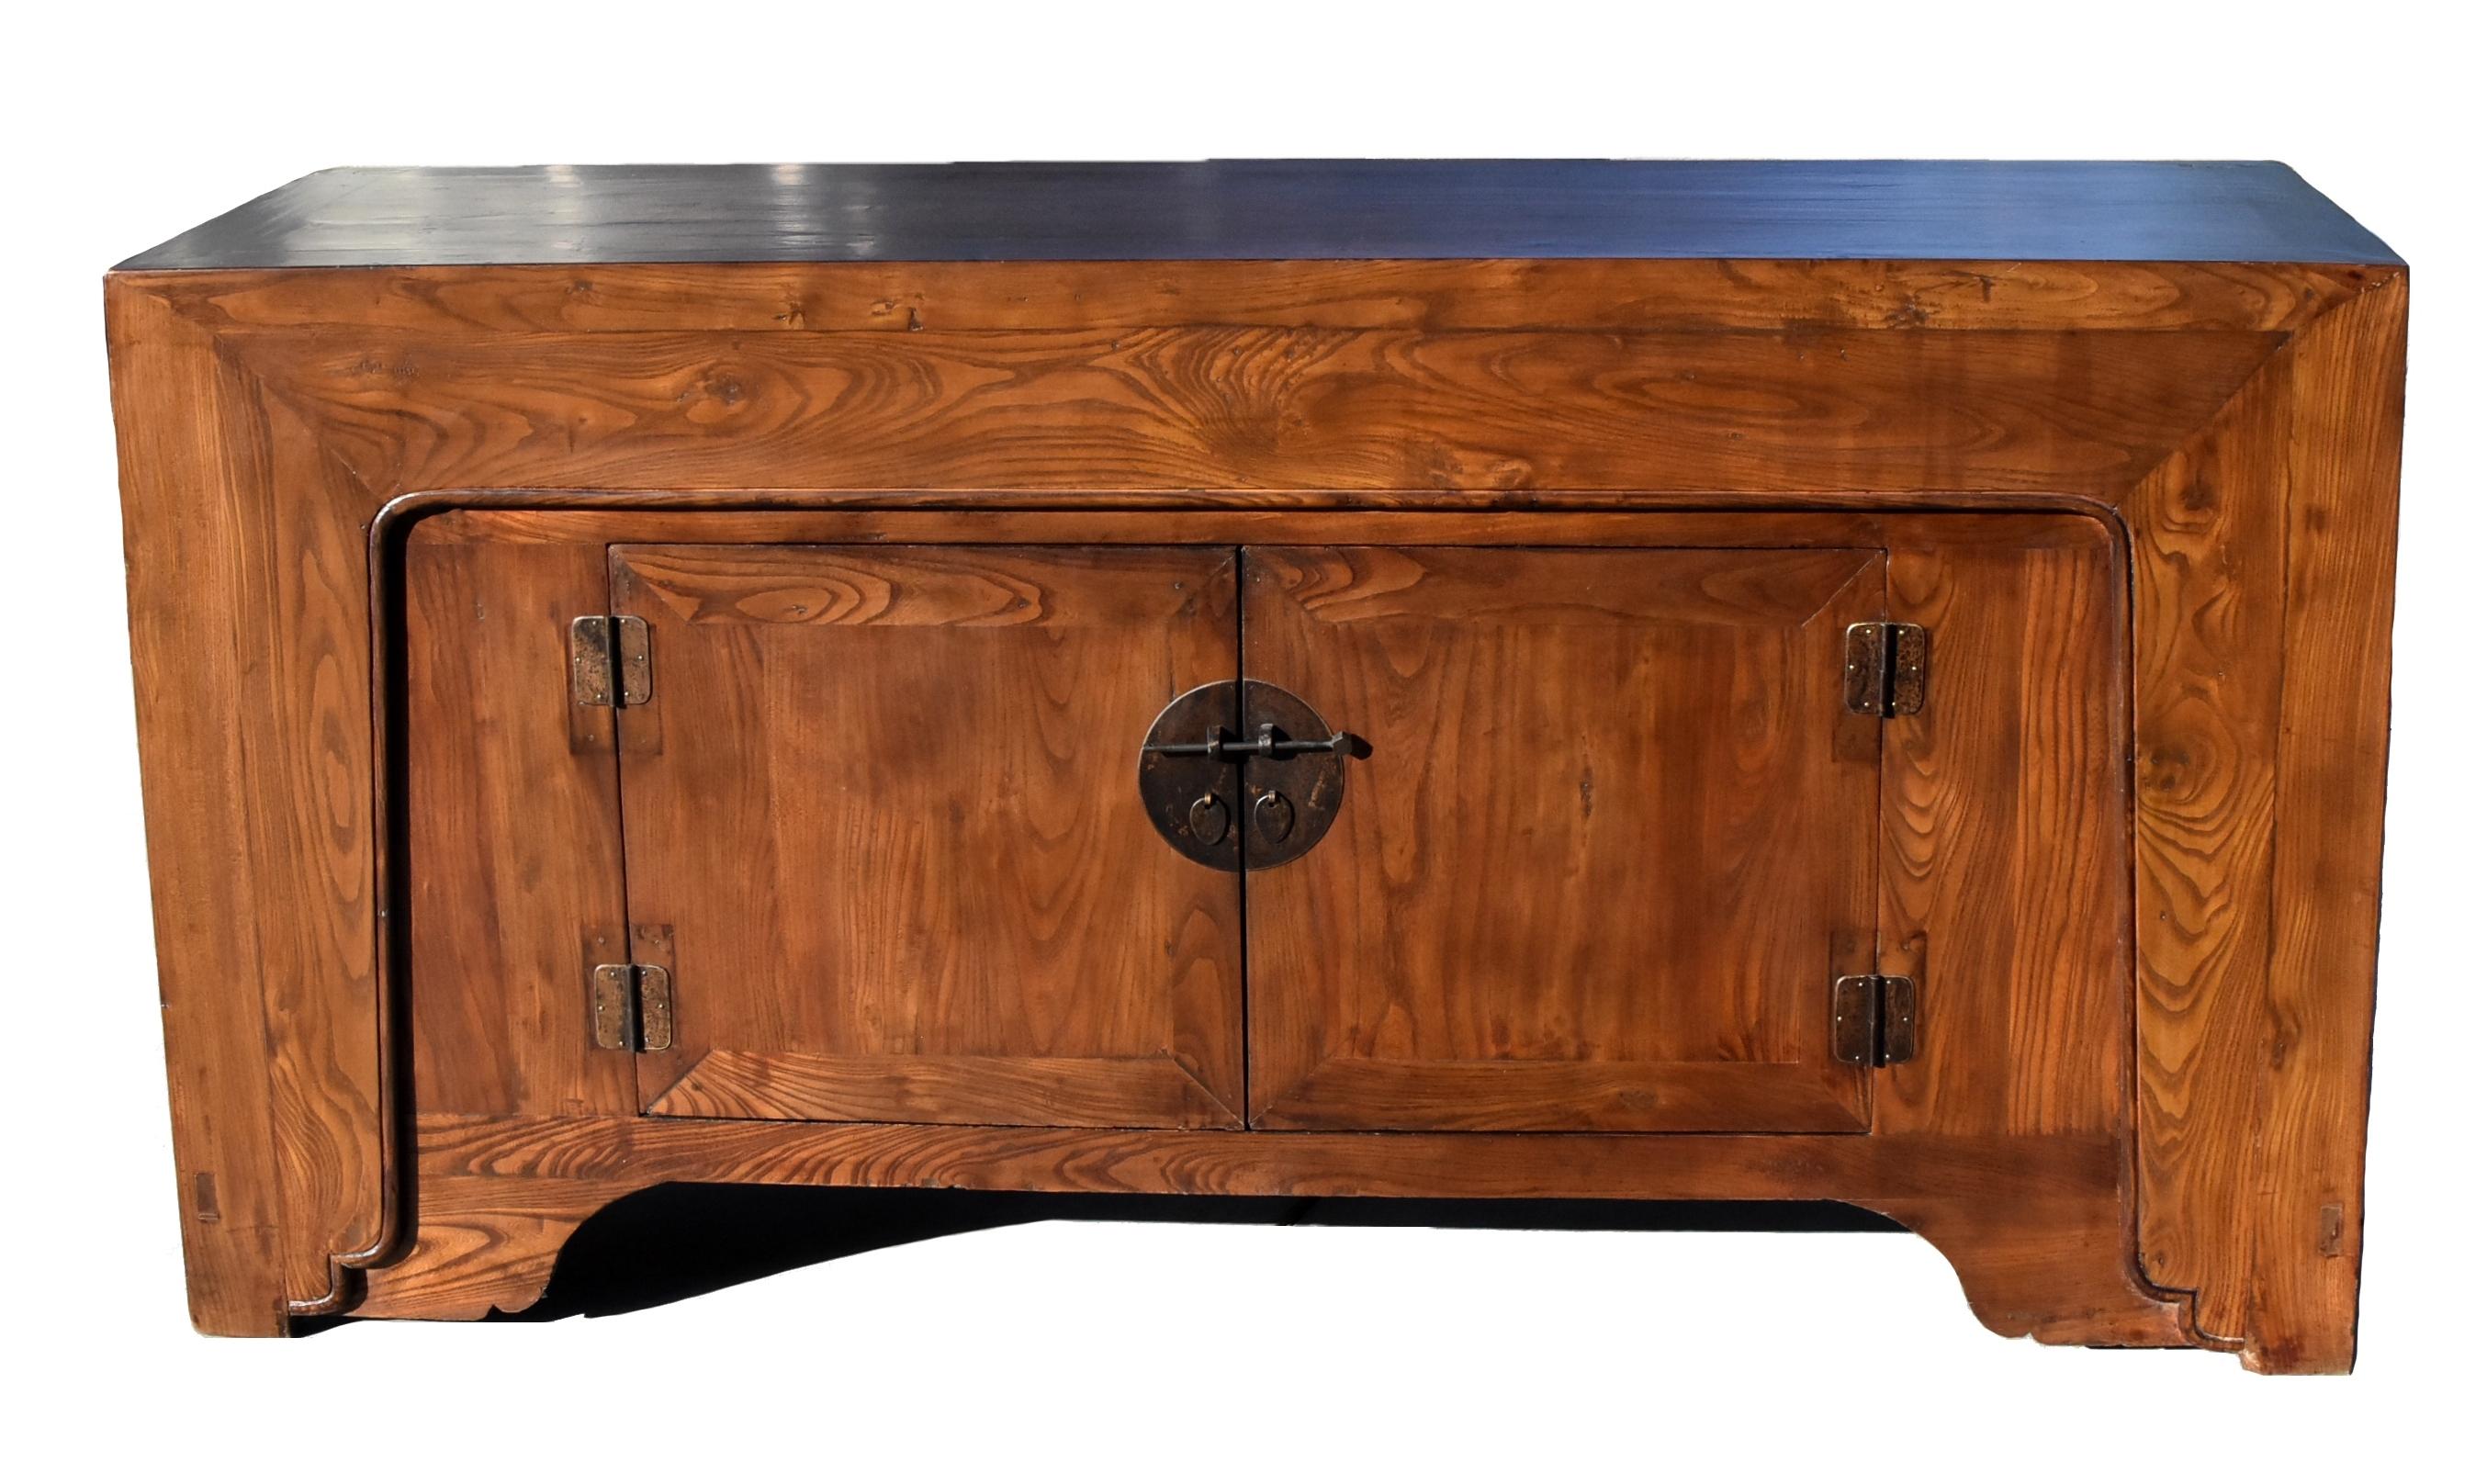 A spectacular 19th century solid wood General's chest from northern China. Mitered, tenon and mortise construction. Heavy, solid, large elm boards with beautiful wood grain. Extra wide, extravagant double framework with elegant, fluid trimming